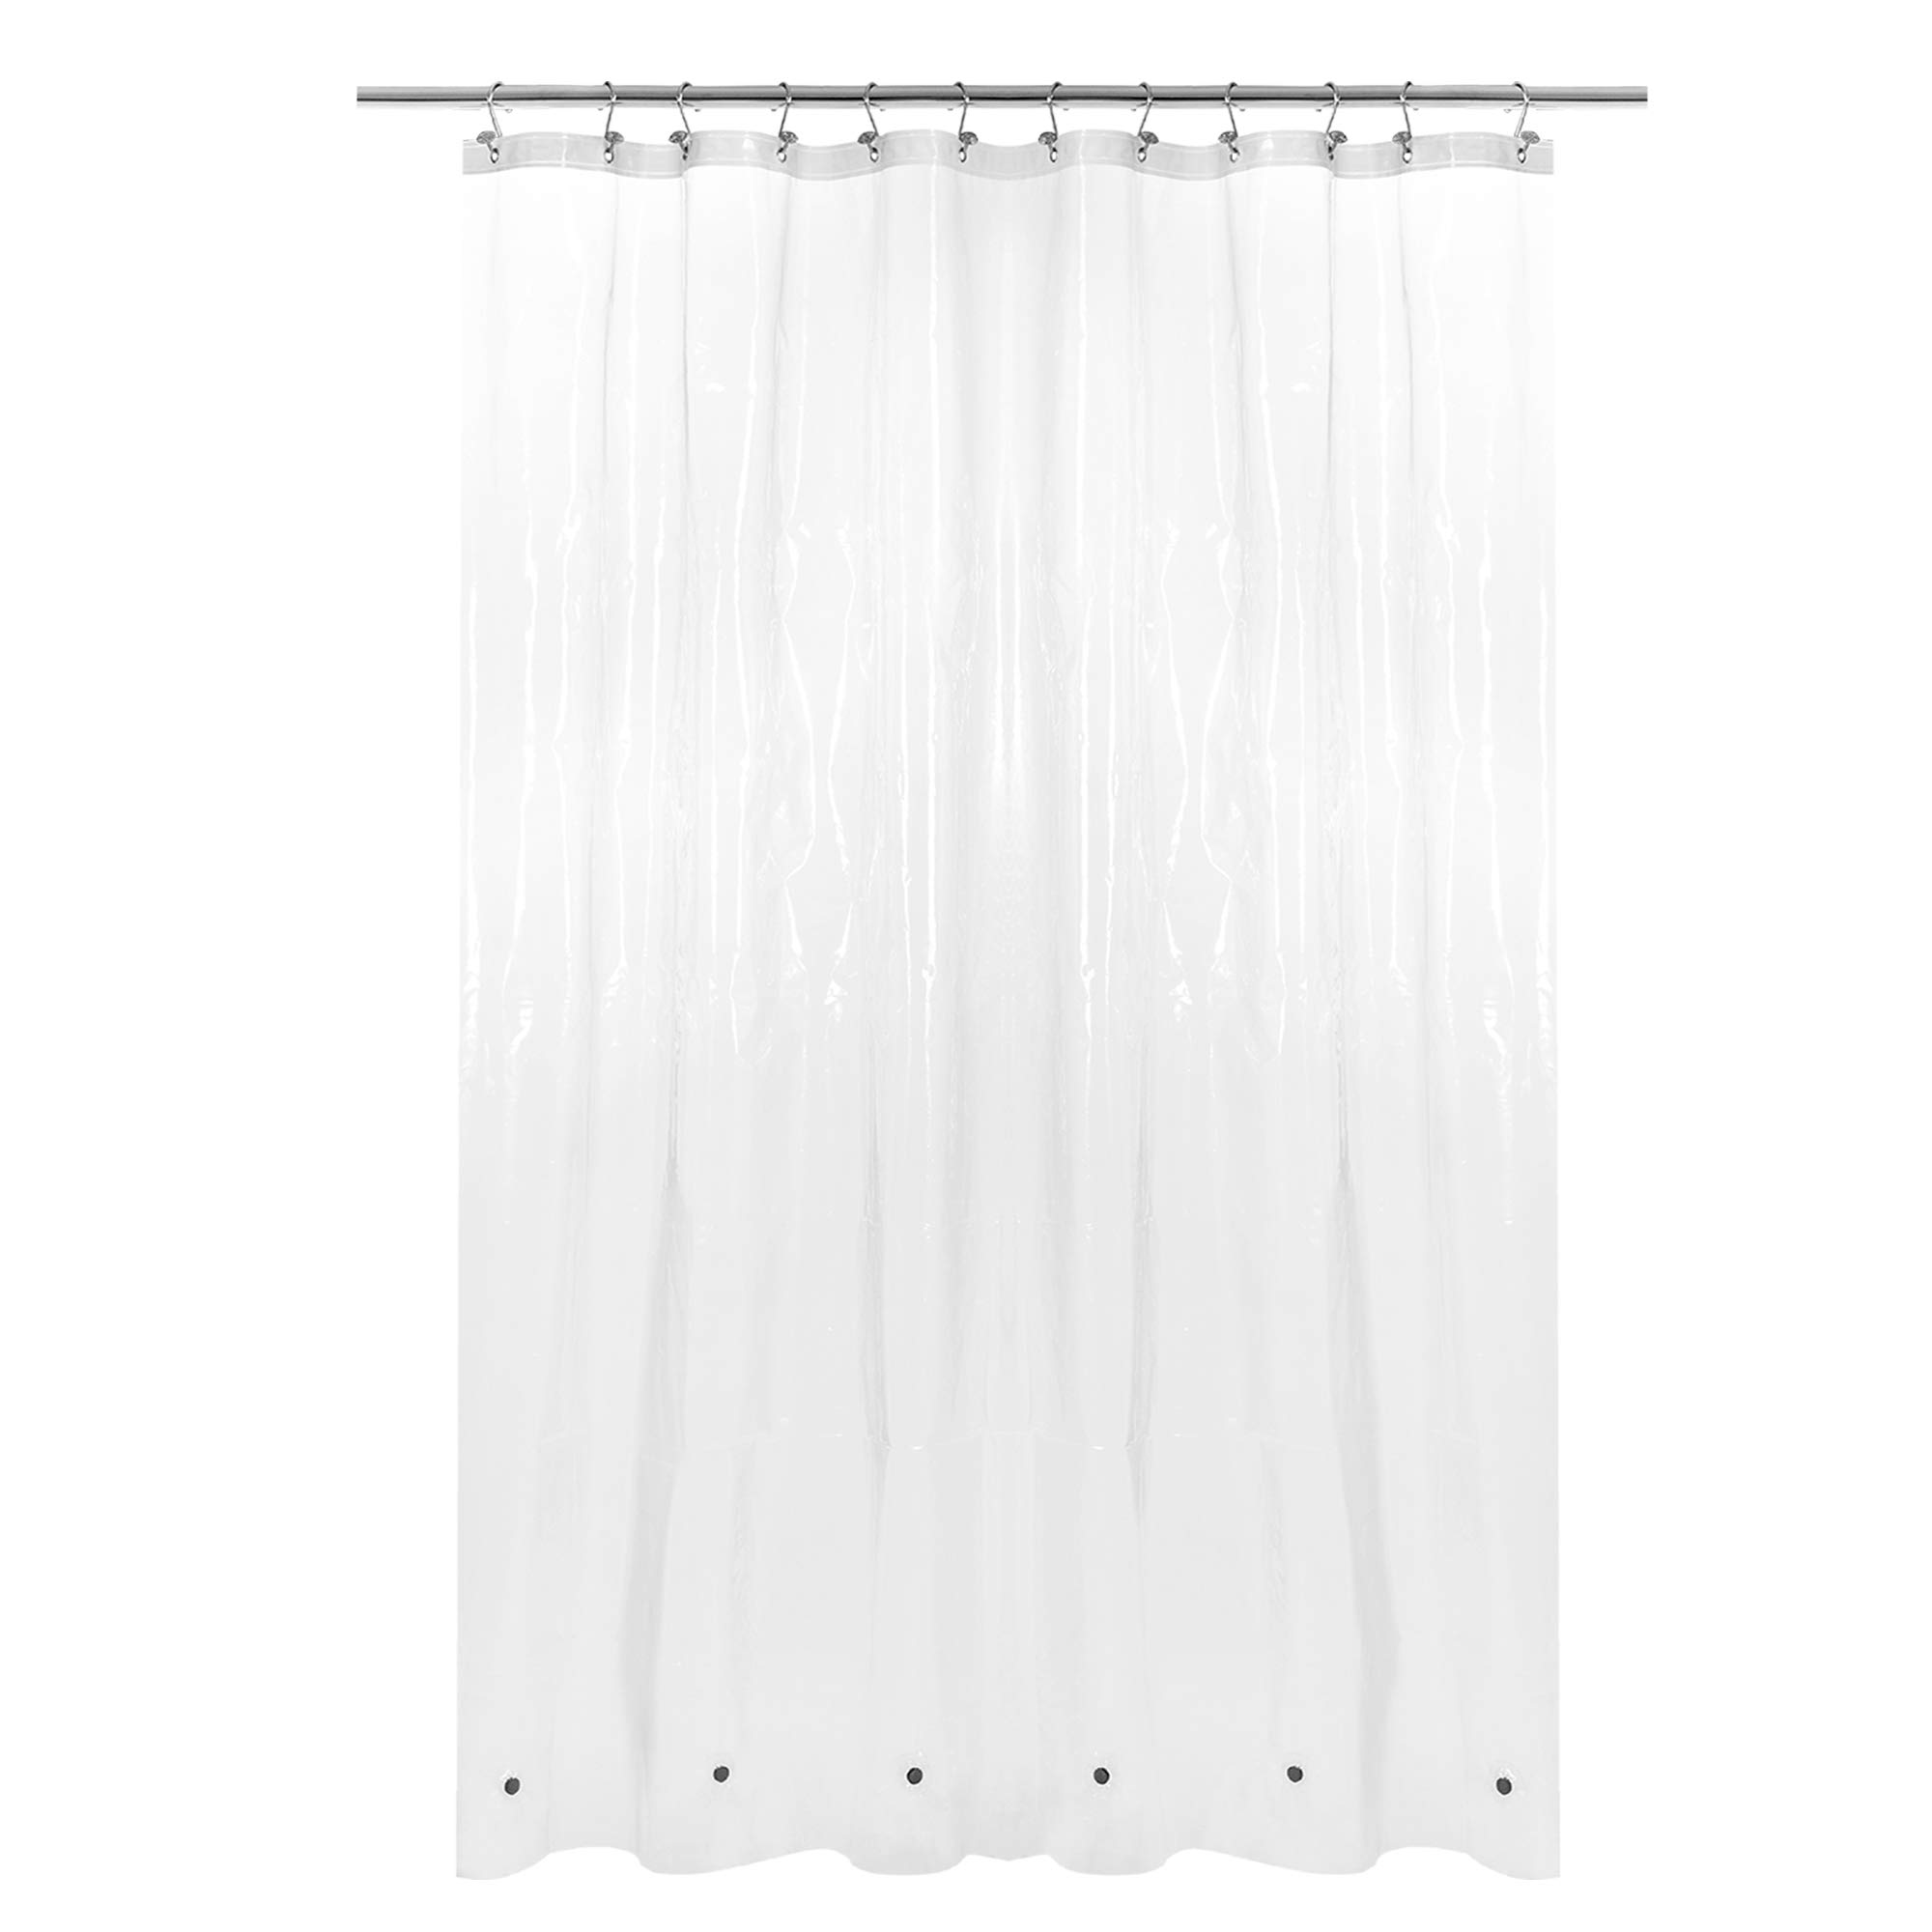 Shower Curtain Liner with 6 Weighted Magnets